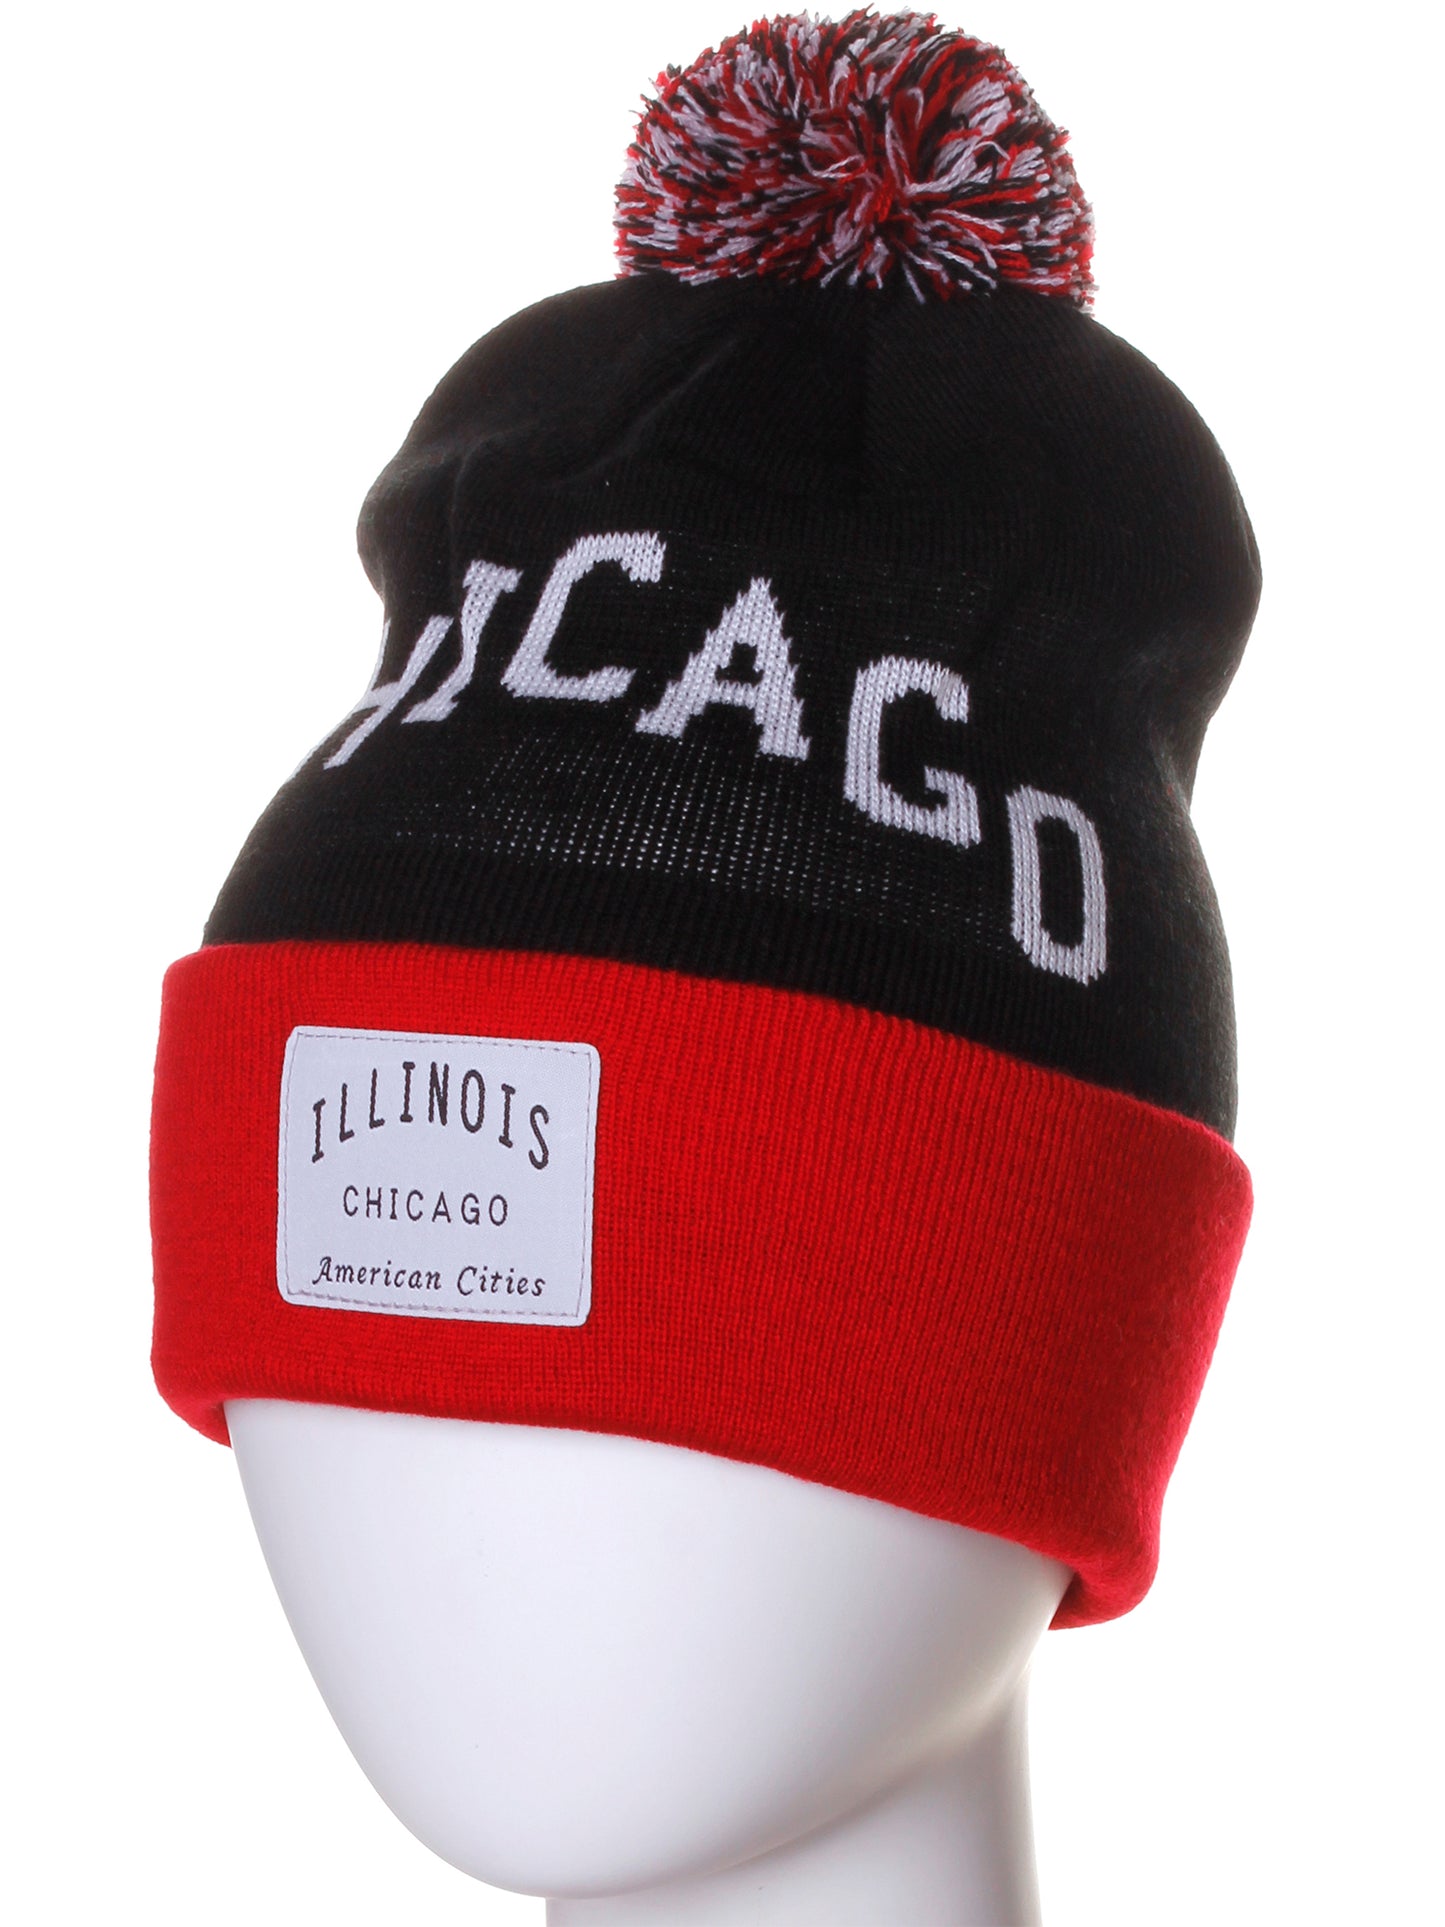 American Cities Chicago Illinois Arch Letters Pom Pom Knit Hat Cap Beanie